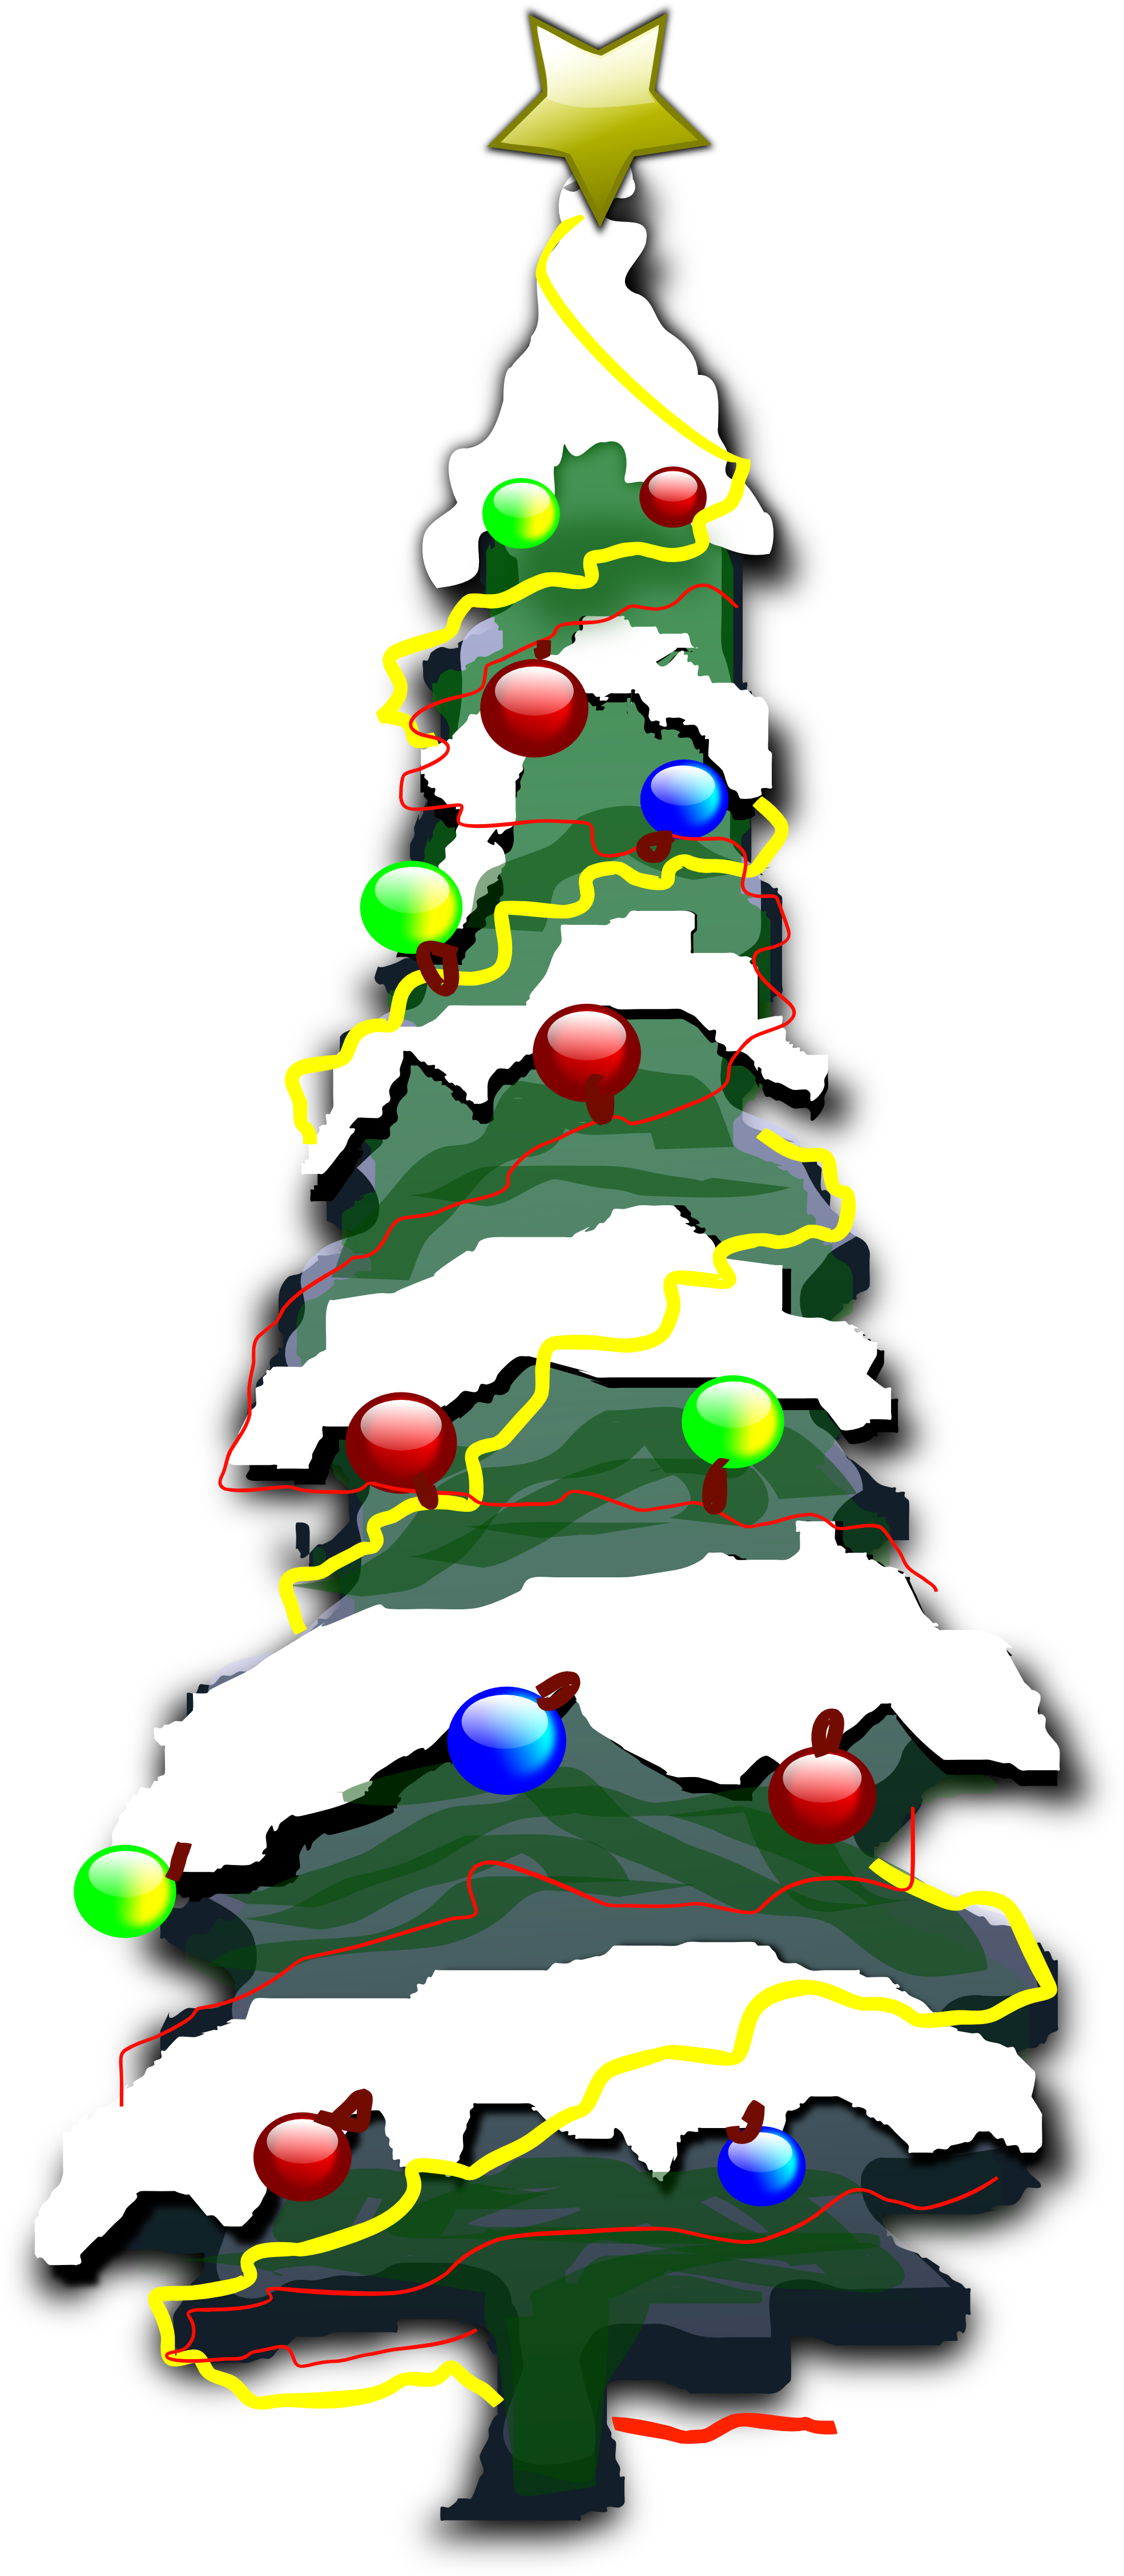 Decorated Christmas Tree With Snow Clip Art At Clker - Snowy Christmas Tree Cartoon (1969x4514)